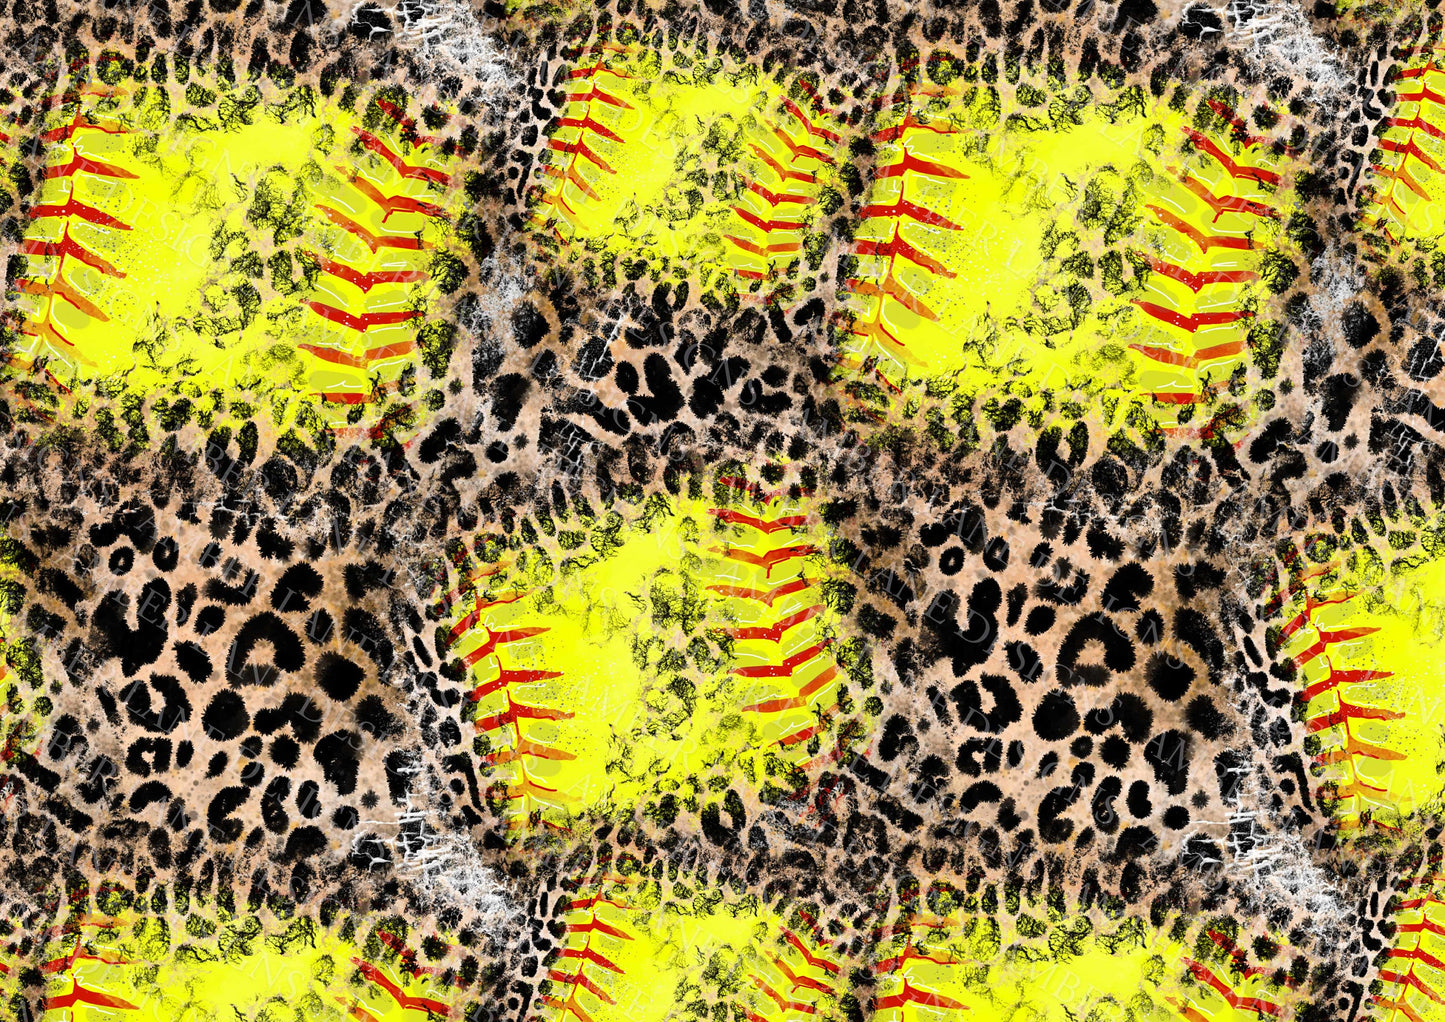 SEAMLESS paper Softball and leopard 12x12 inches, jpeg file.